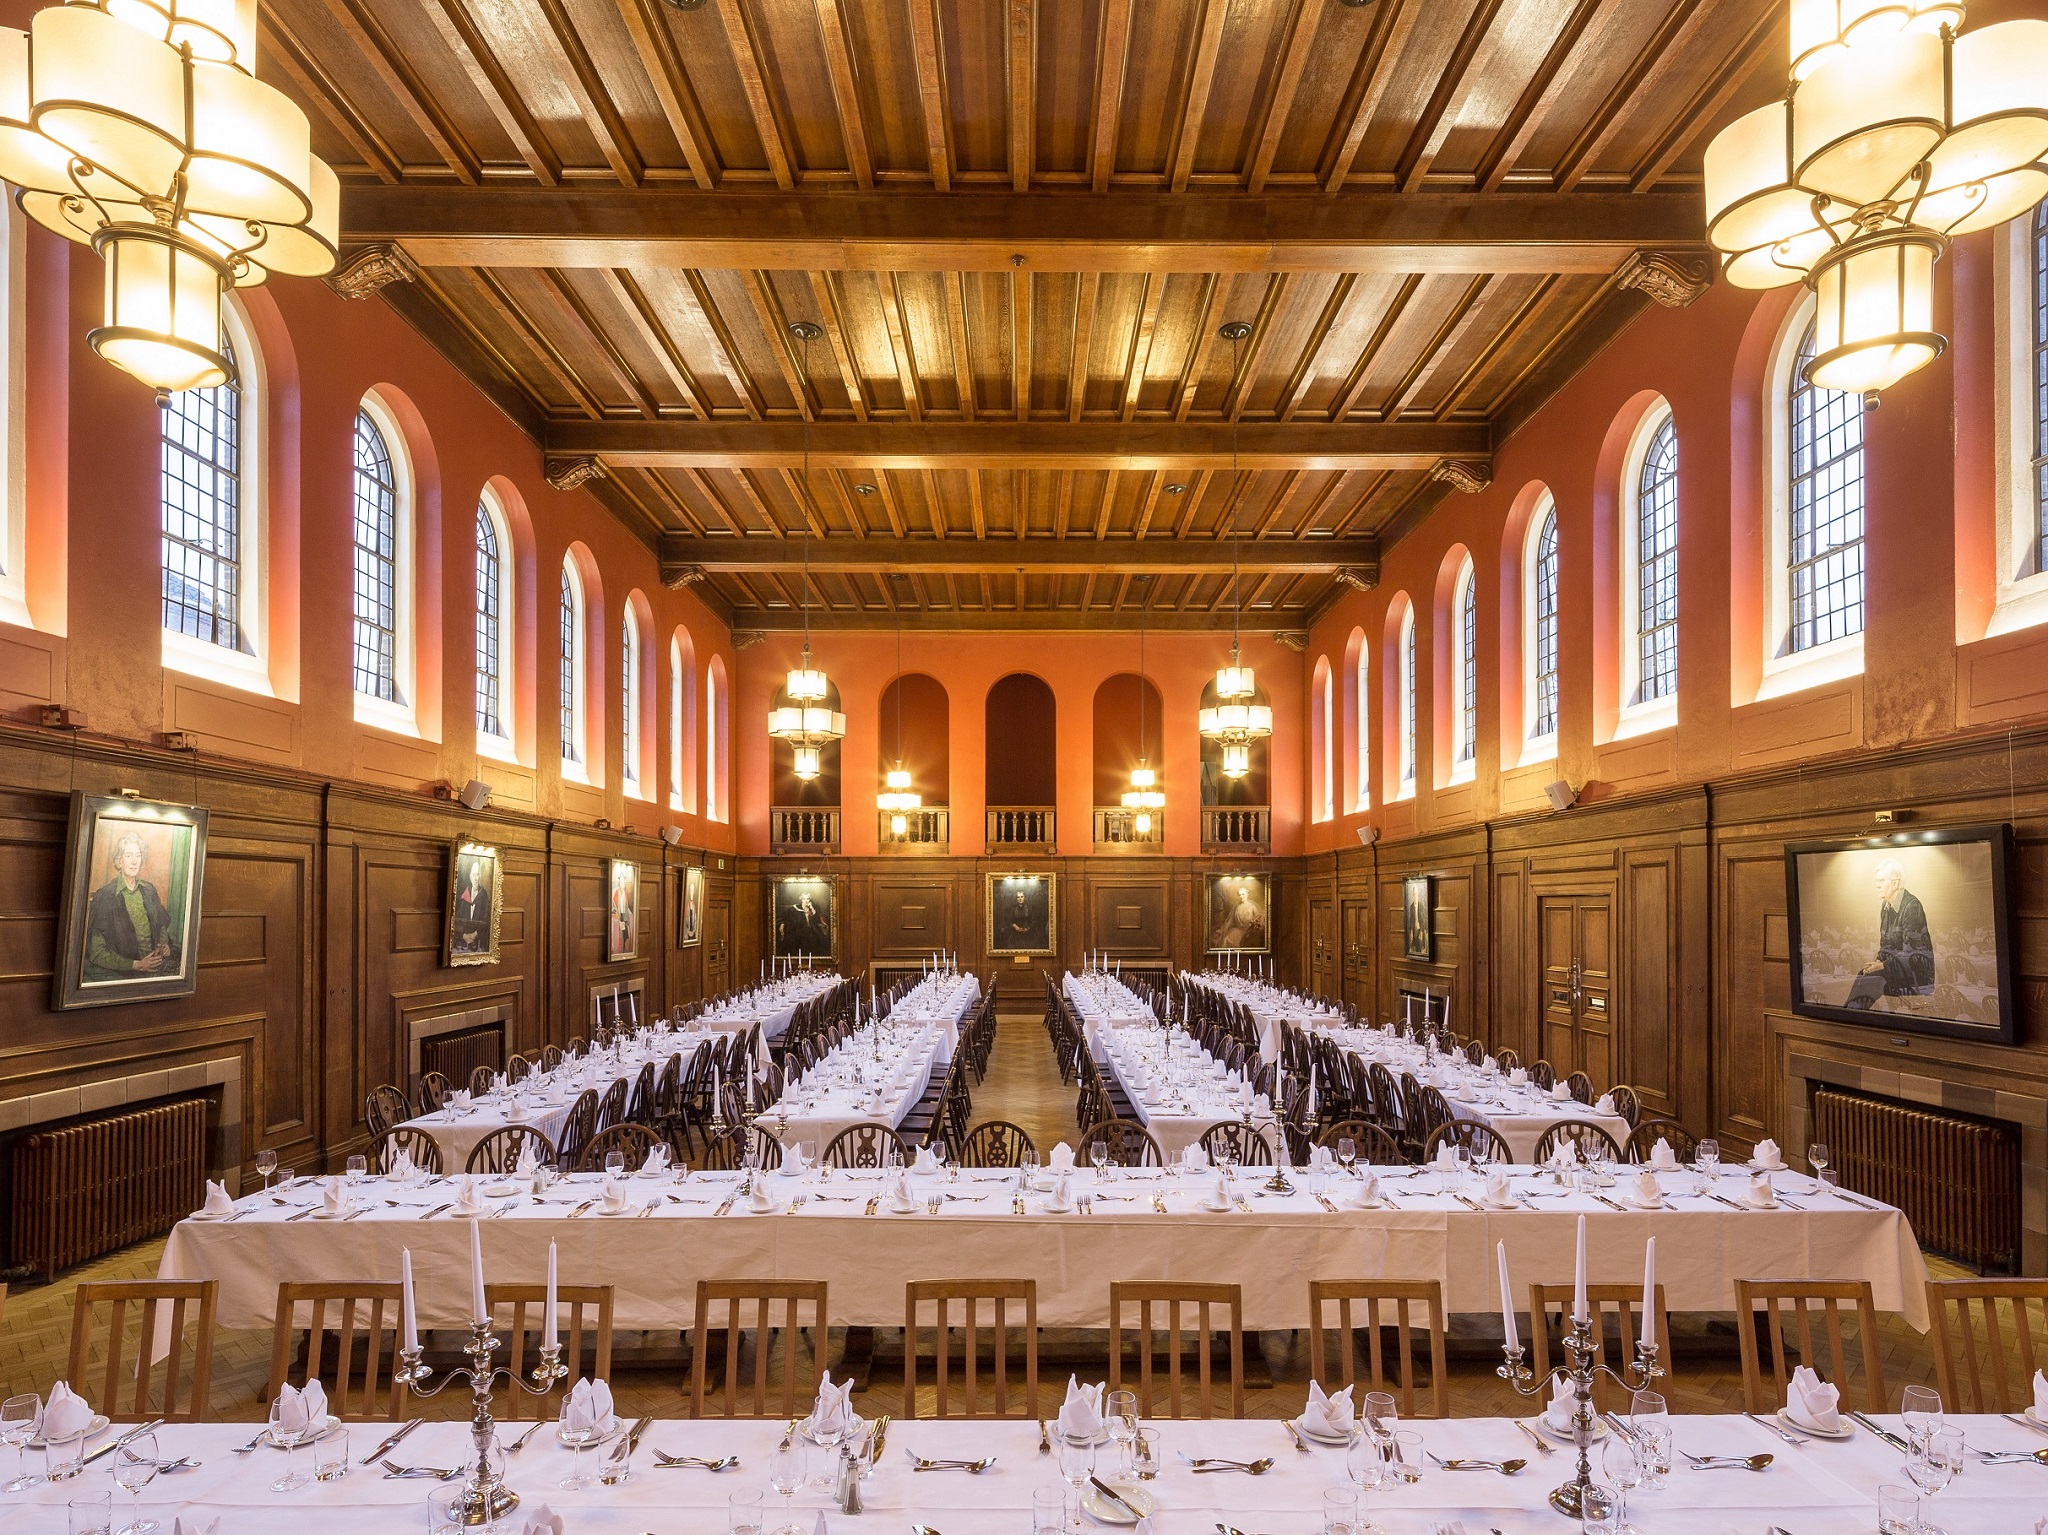 LMH Dining Hall prepared for a formal dinner